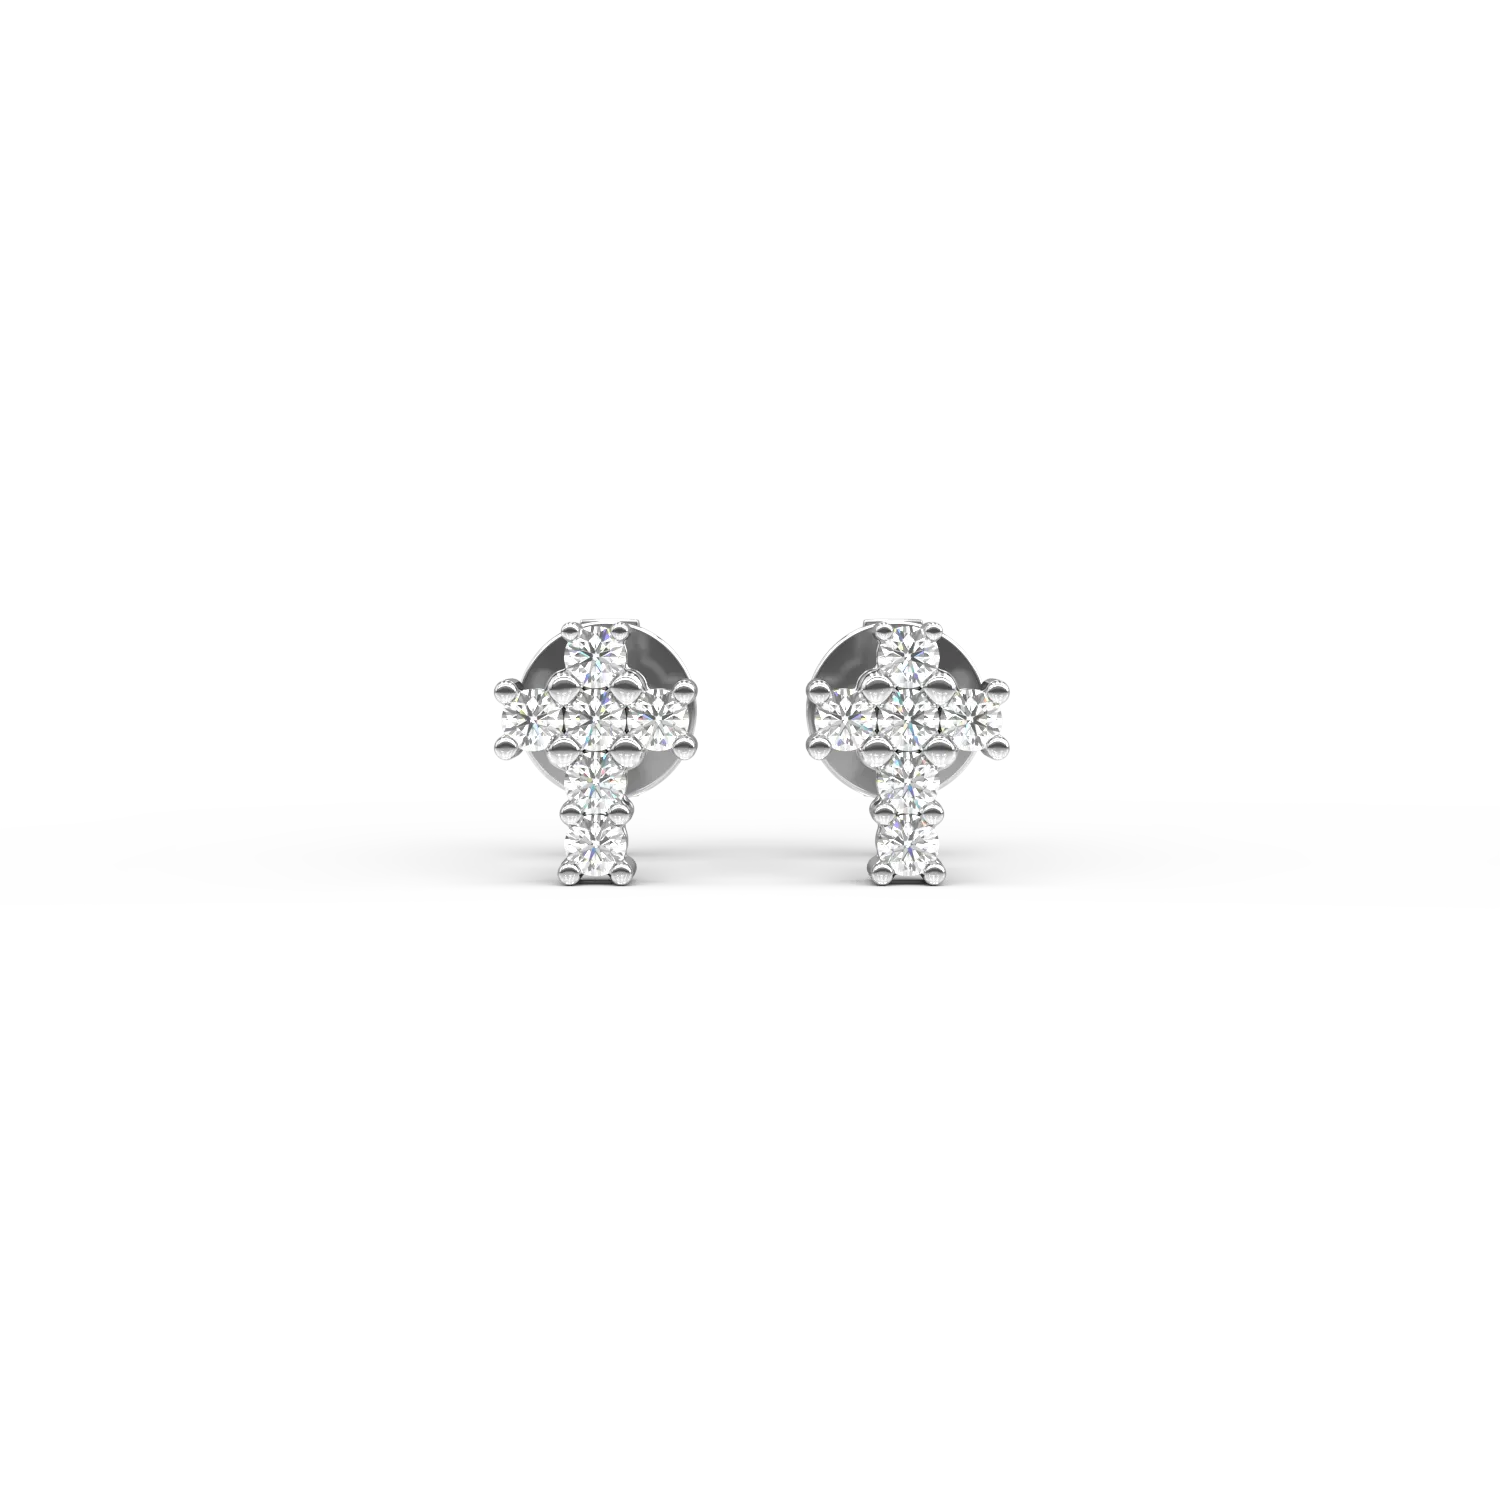 18K white gold earrings with 0.084ct diamonds